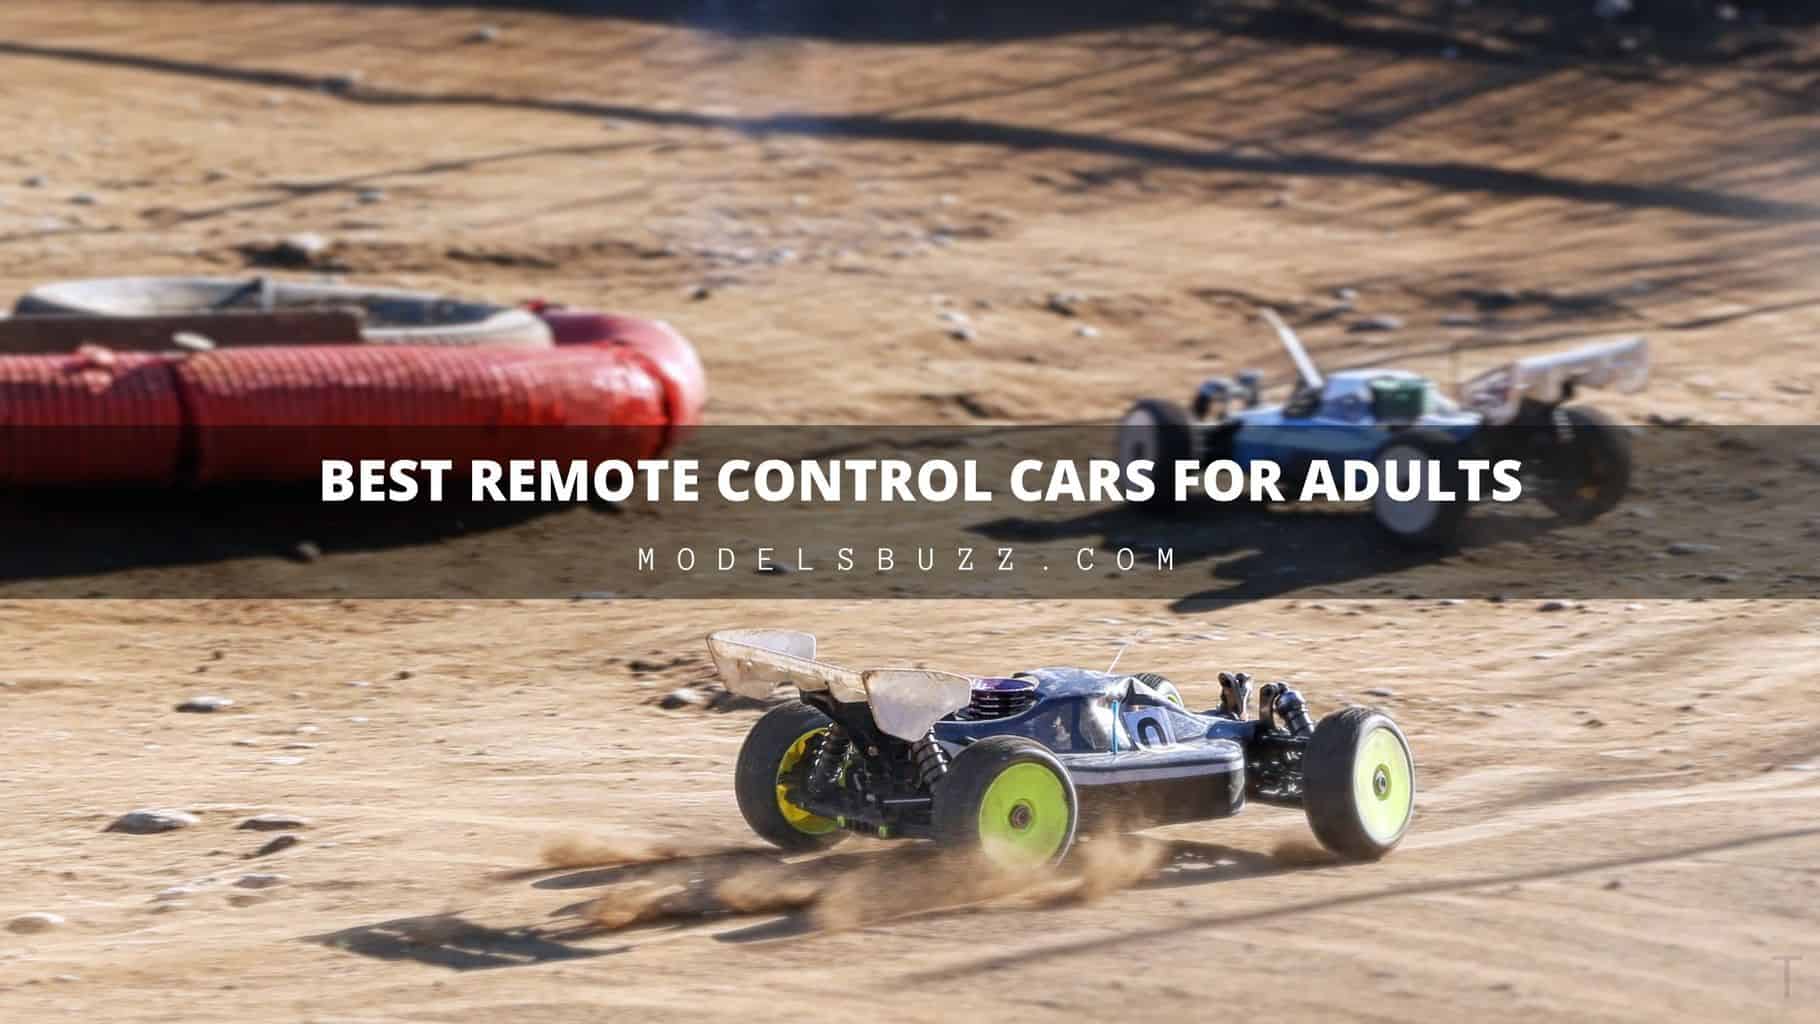 Best Remote Control Cars for Adults